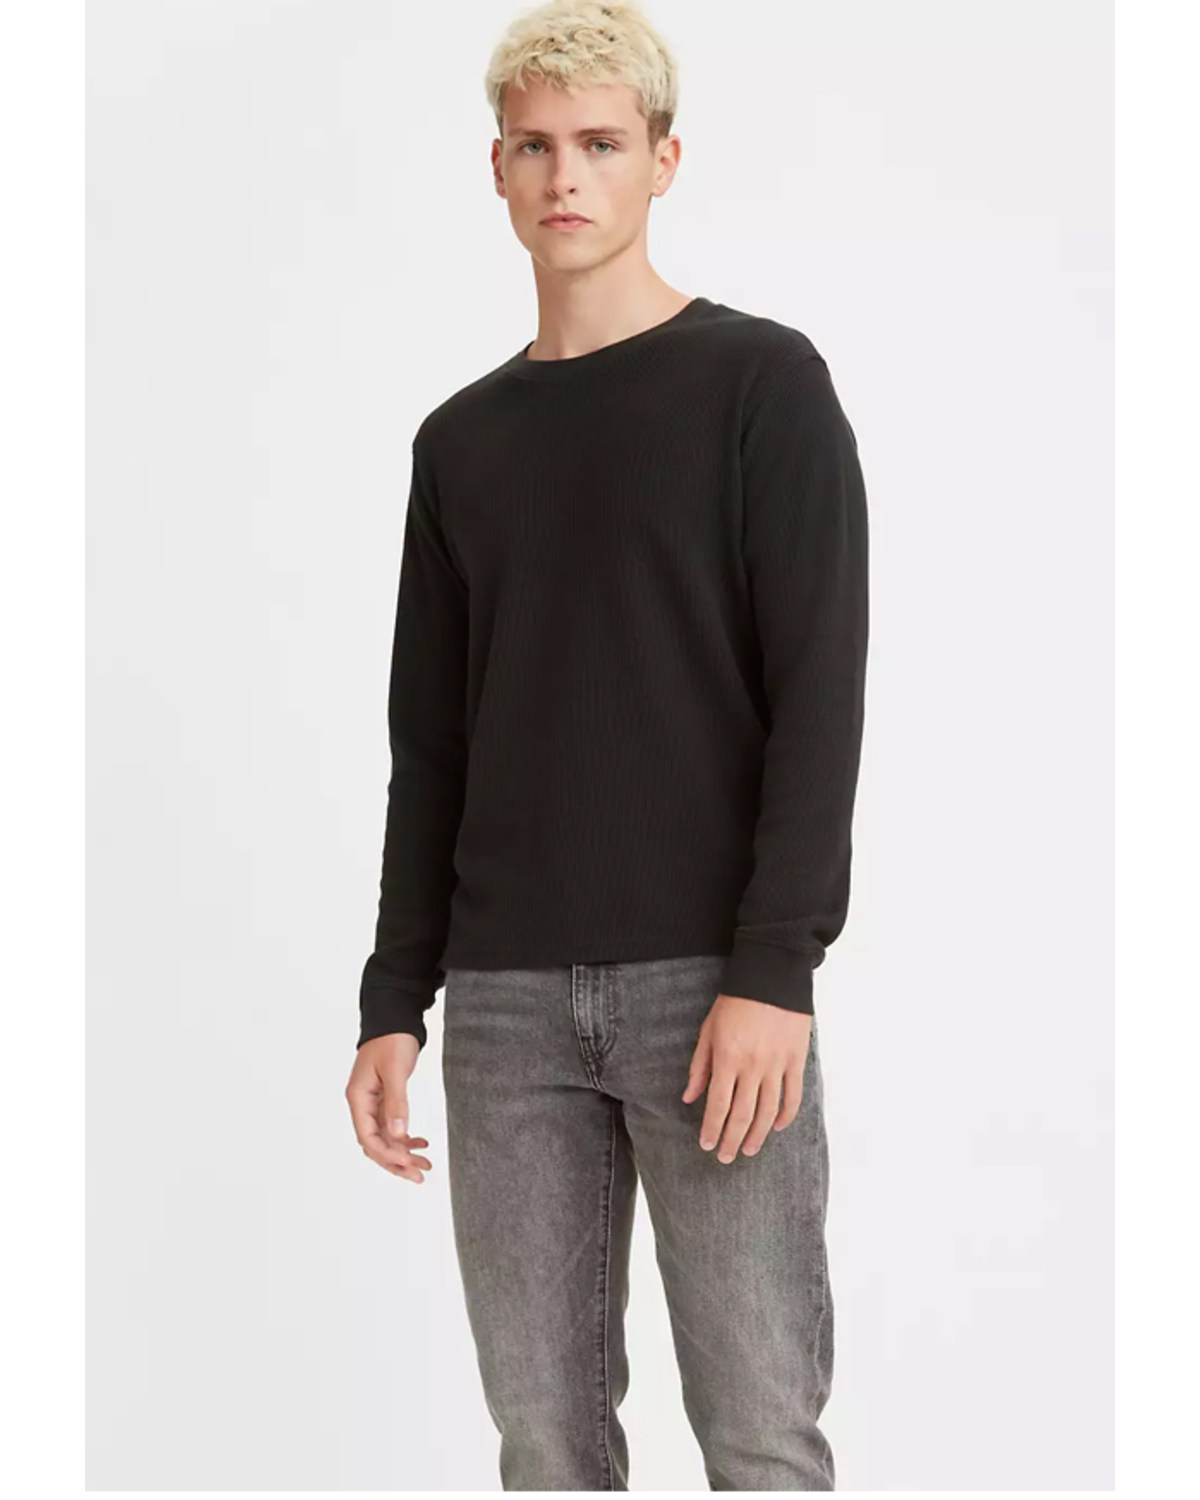 Levi's Men's Solid Black Relaxed Thermal Long Sleeve T-Shirt